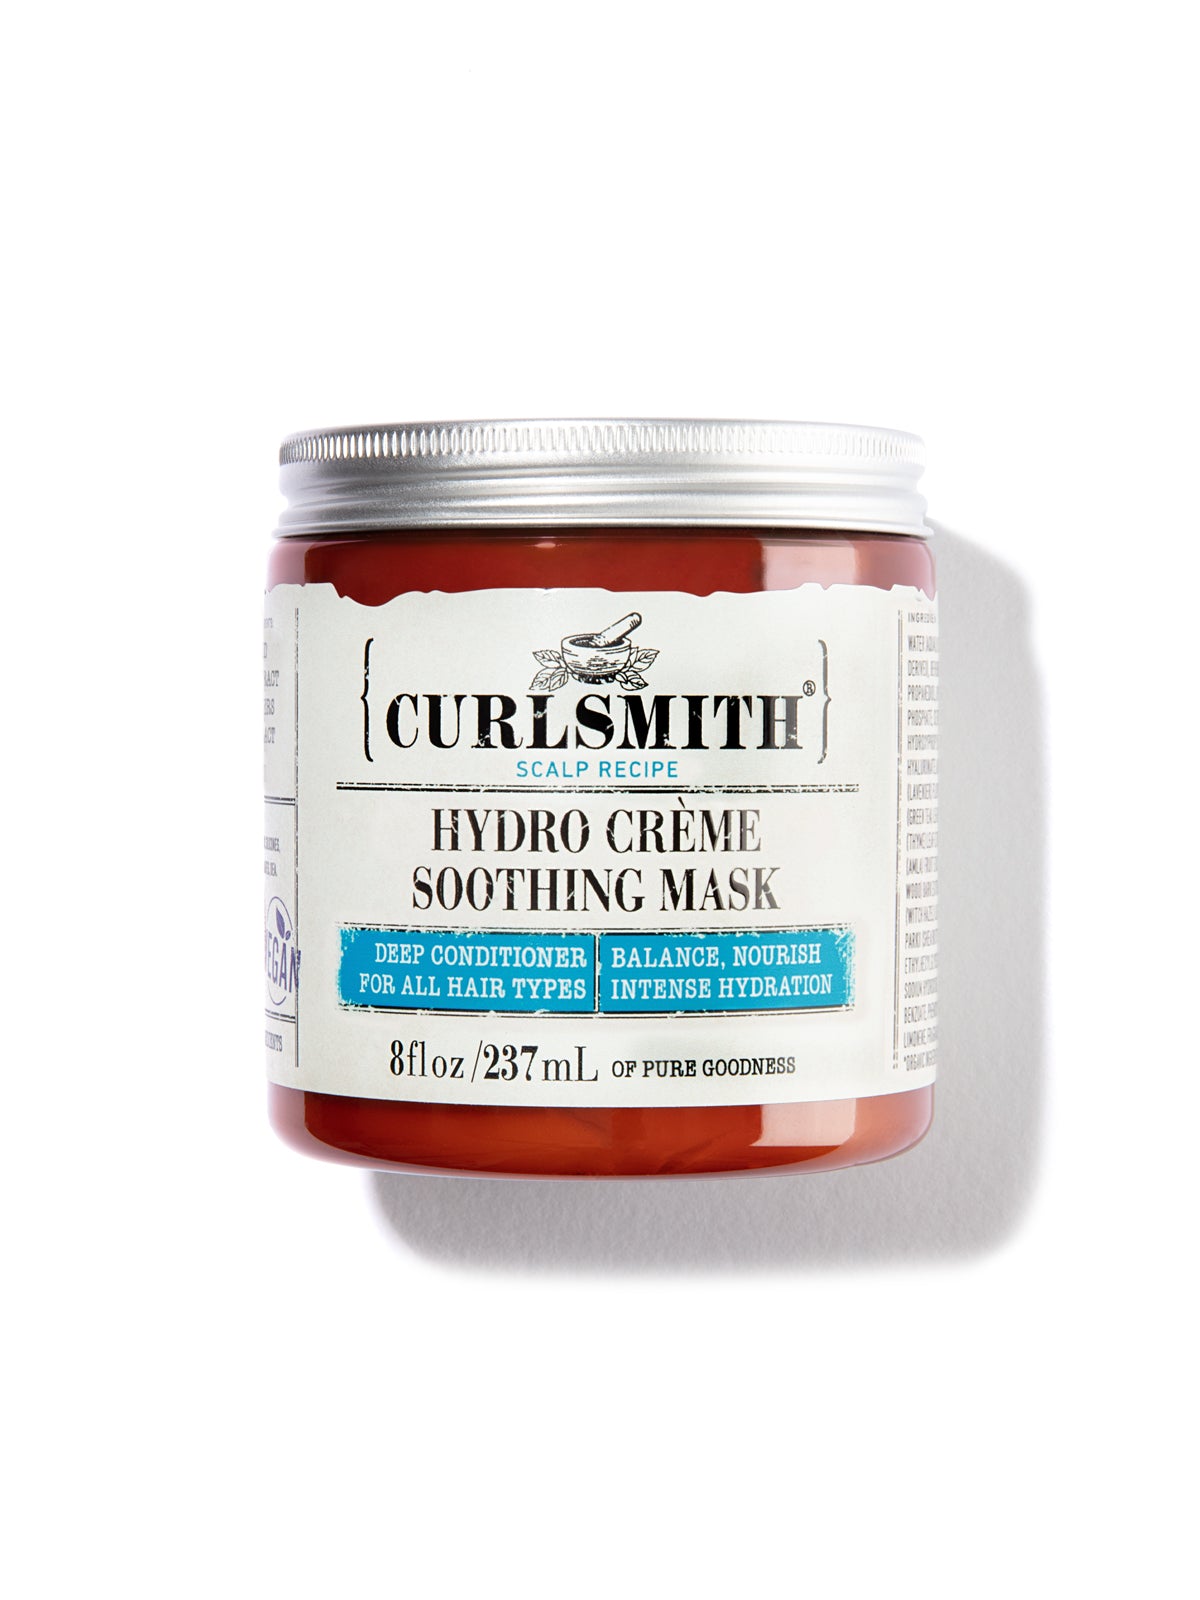 Curlsmith Hydro Creme Soothing Mask